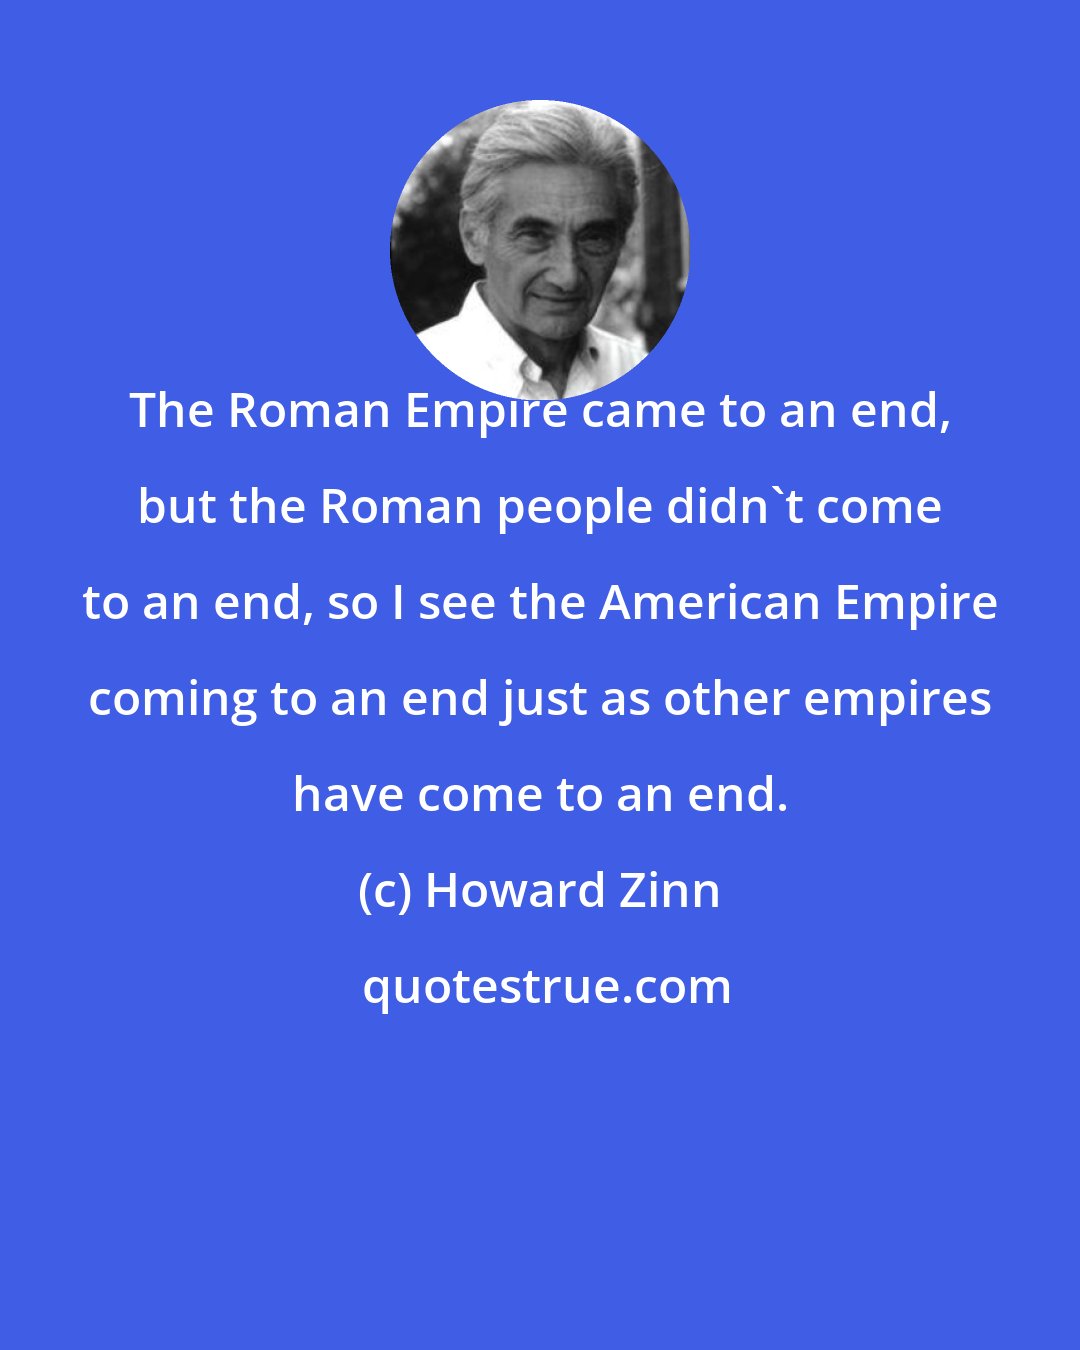 Howard Zinn: The Roman Empire came to an end, but the Roman people didn't come to an end, so I see the American Empire coming to an end just as other empires have come to an end.